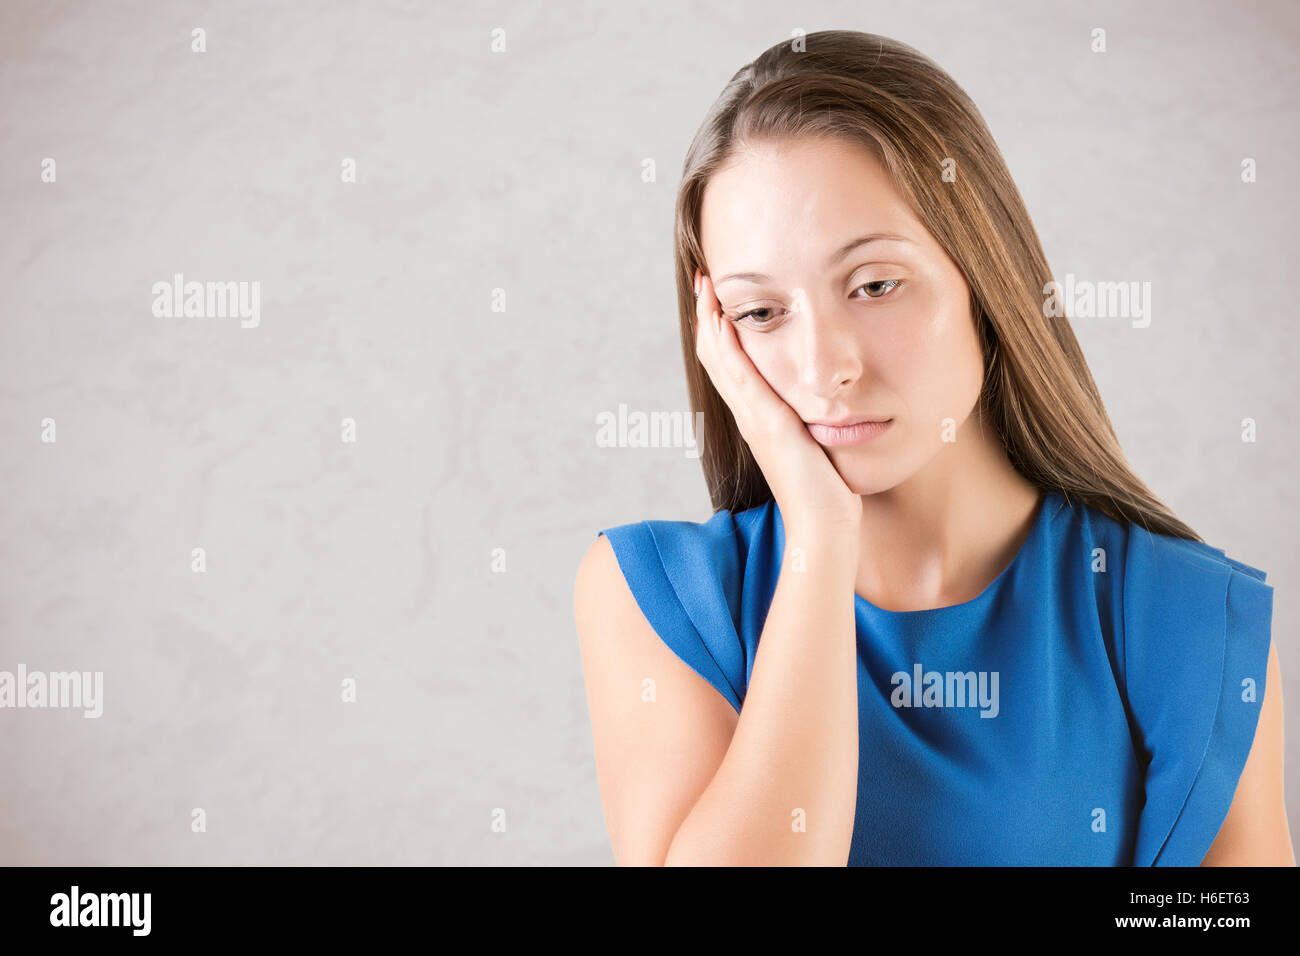 Sad and bored woman thinking about something, isolated in grey Stock Photo